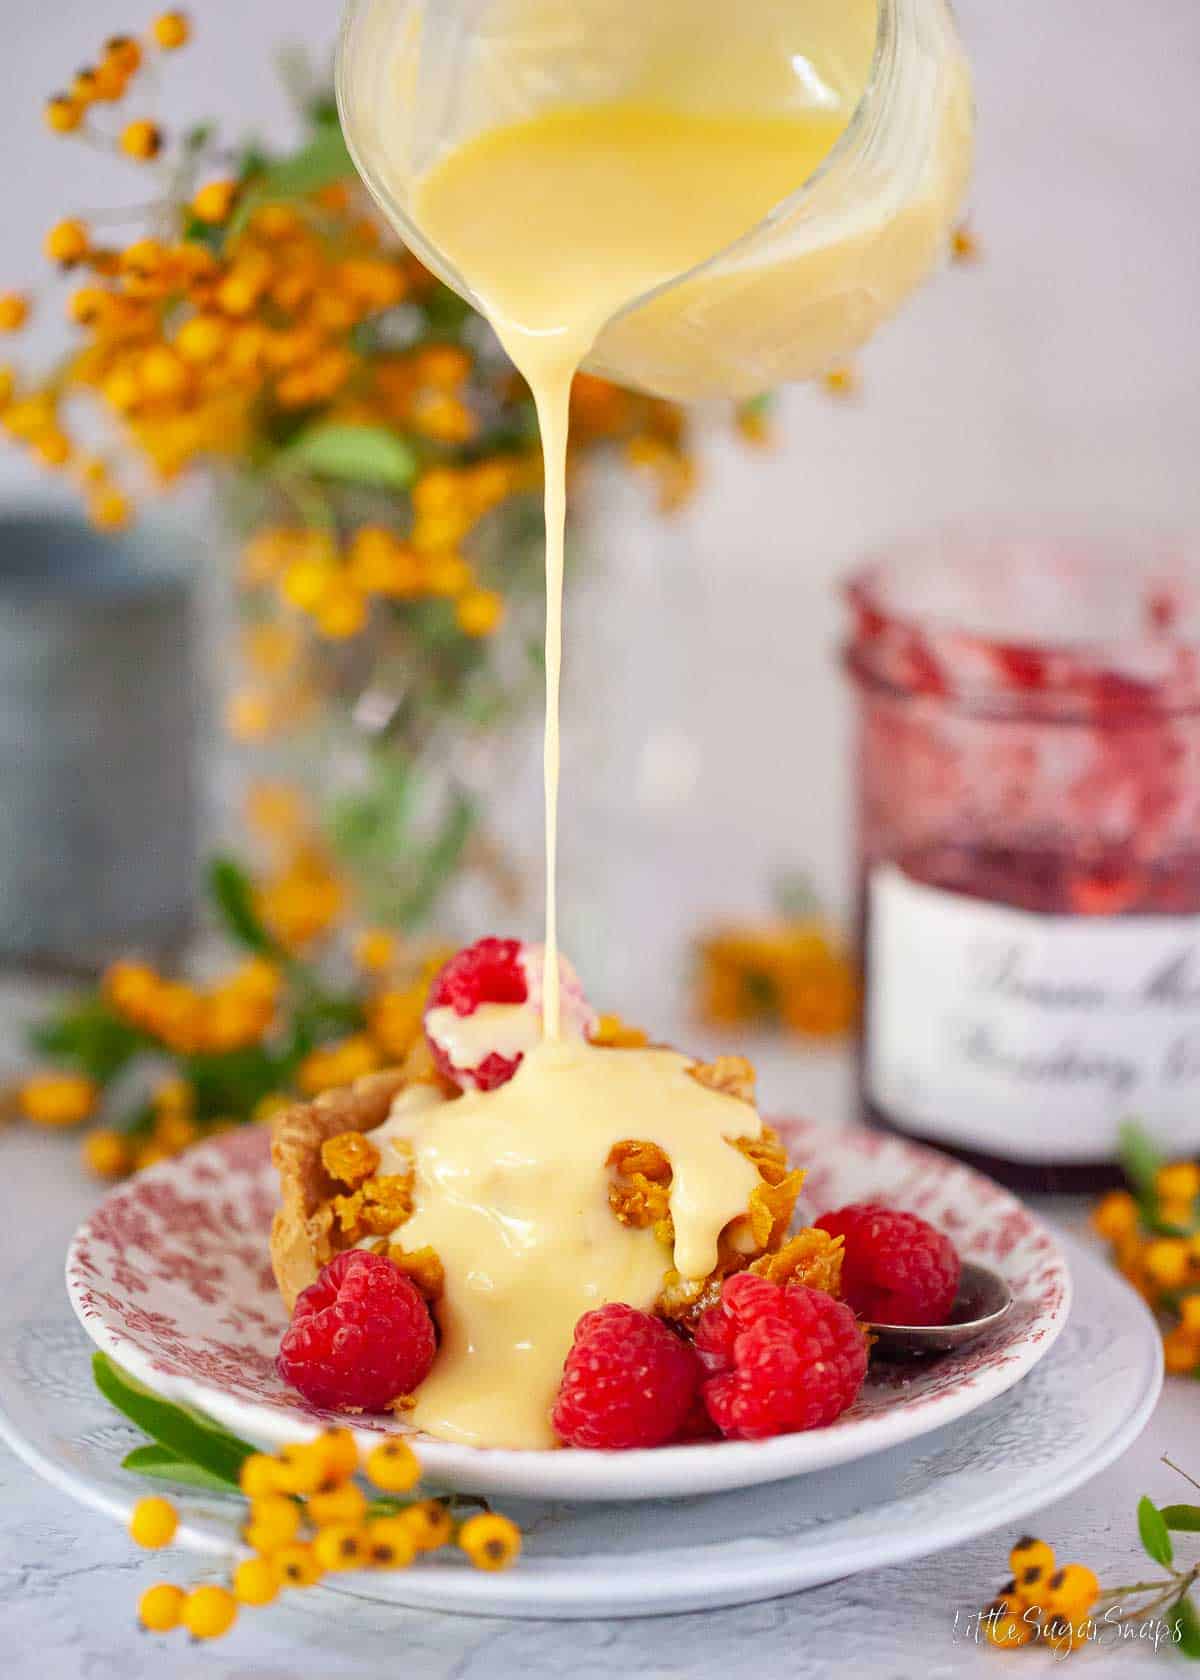 Custard being poured over a classic British childhood school pudding.